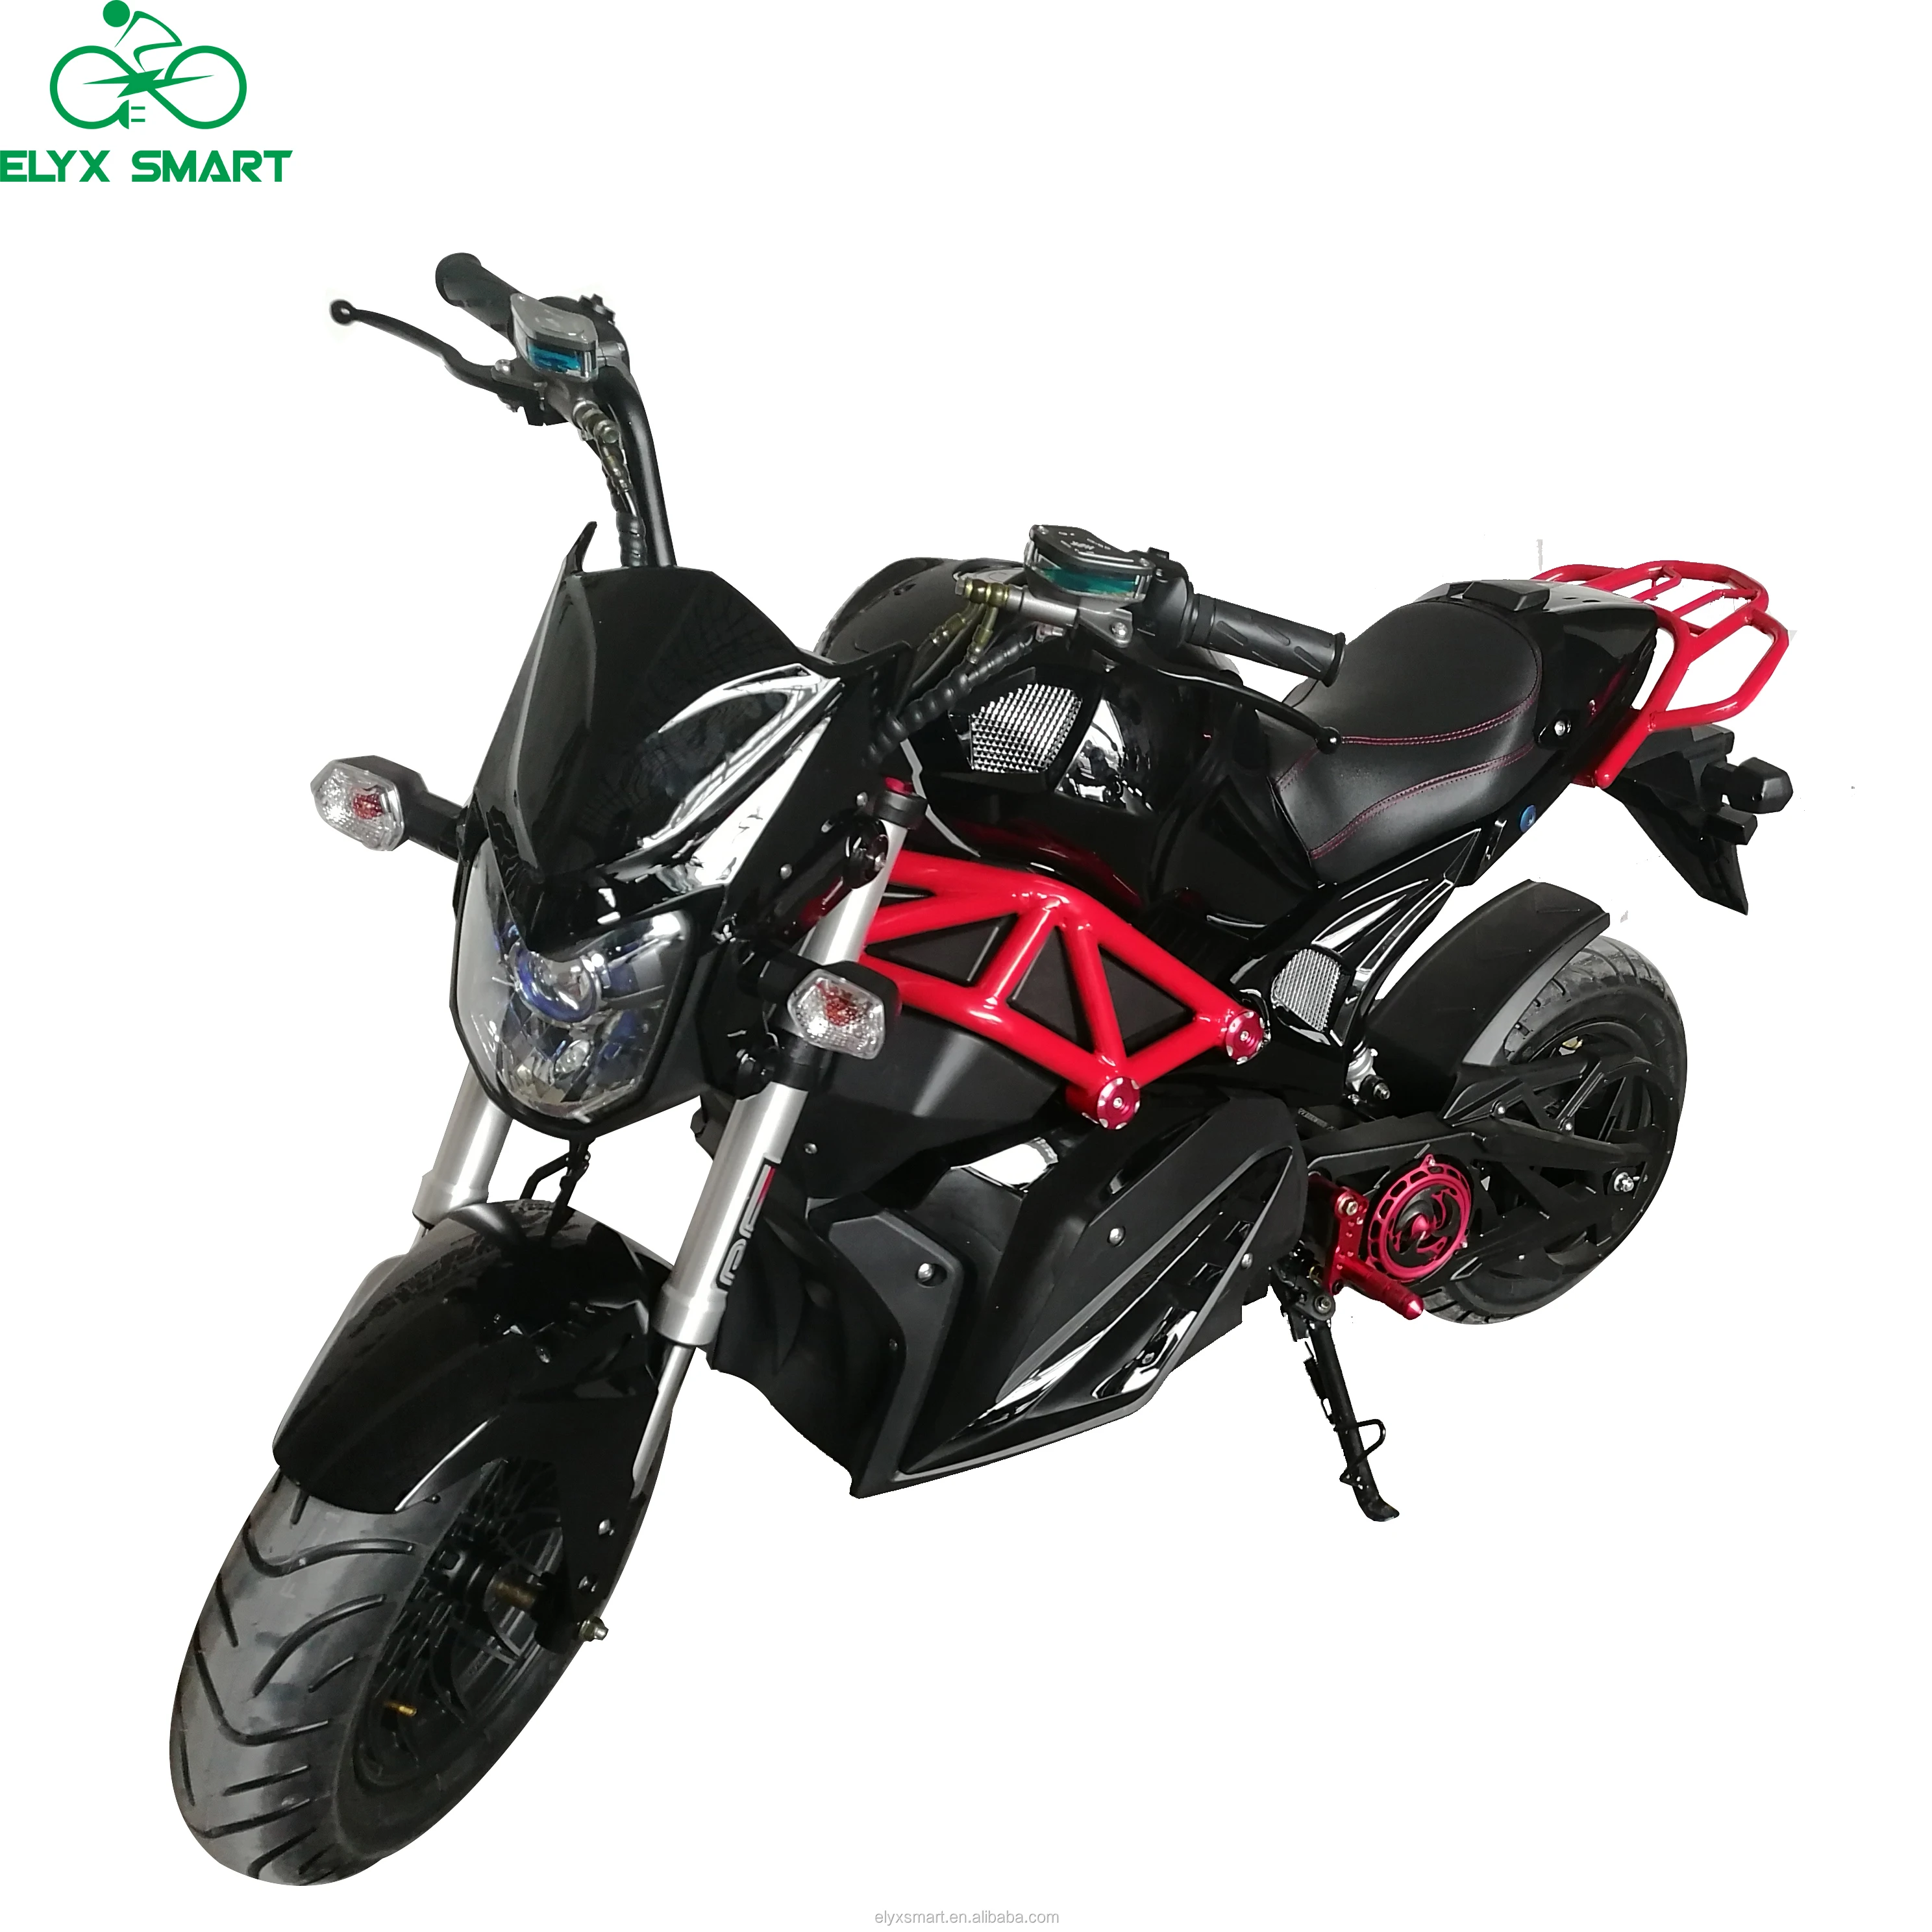 Elyx Monster S 72V 3000w Pit Bike Off Road COC Super Cub Lithium Battery 80KM/H Racing Motorcycle Electric Motorcycle